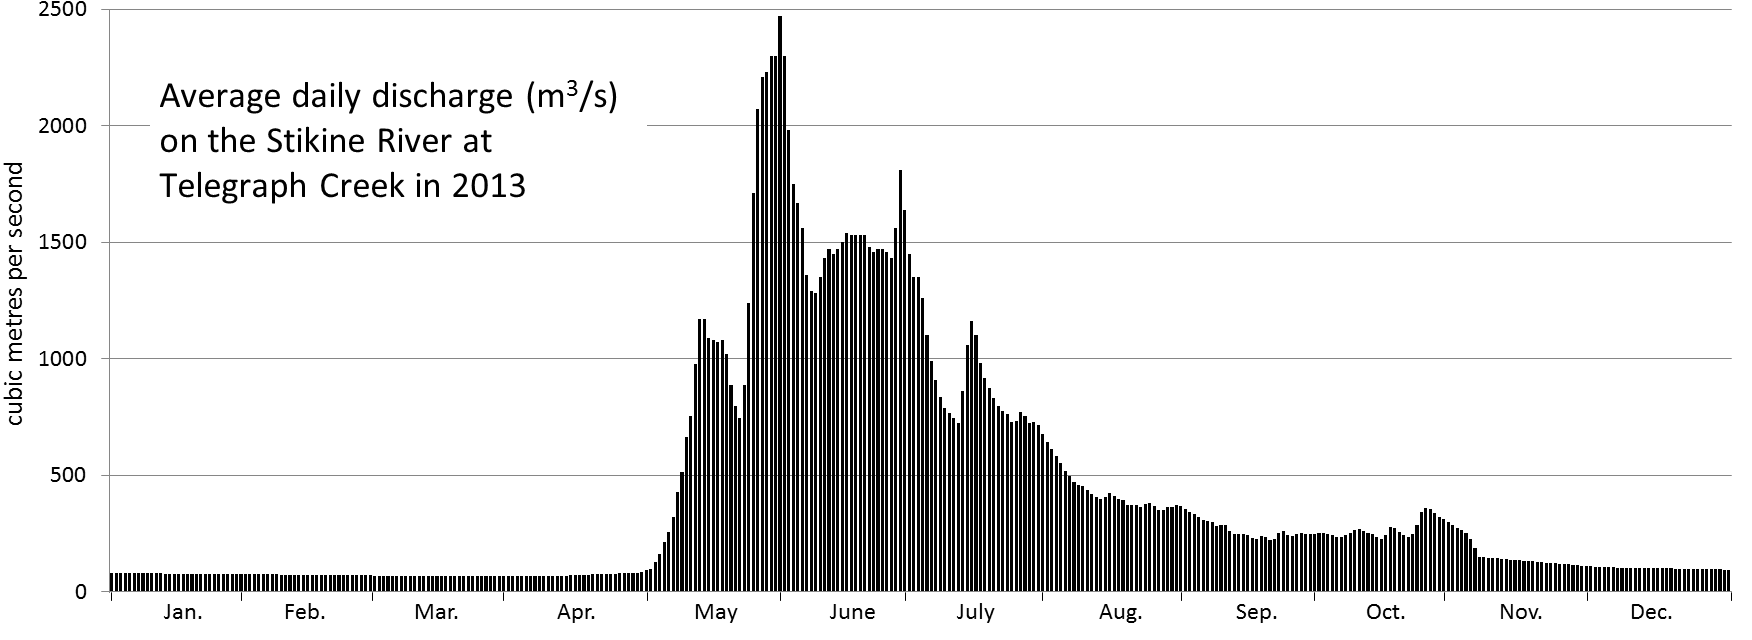 Figure 13.24 Variations in discharge of the Stikine River during 2013. [SE from data at Water Survey of Canada, Environment Canada, http://www.ec.gc.ca/rhc-wsc/]